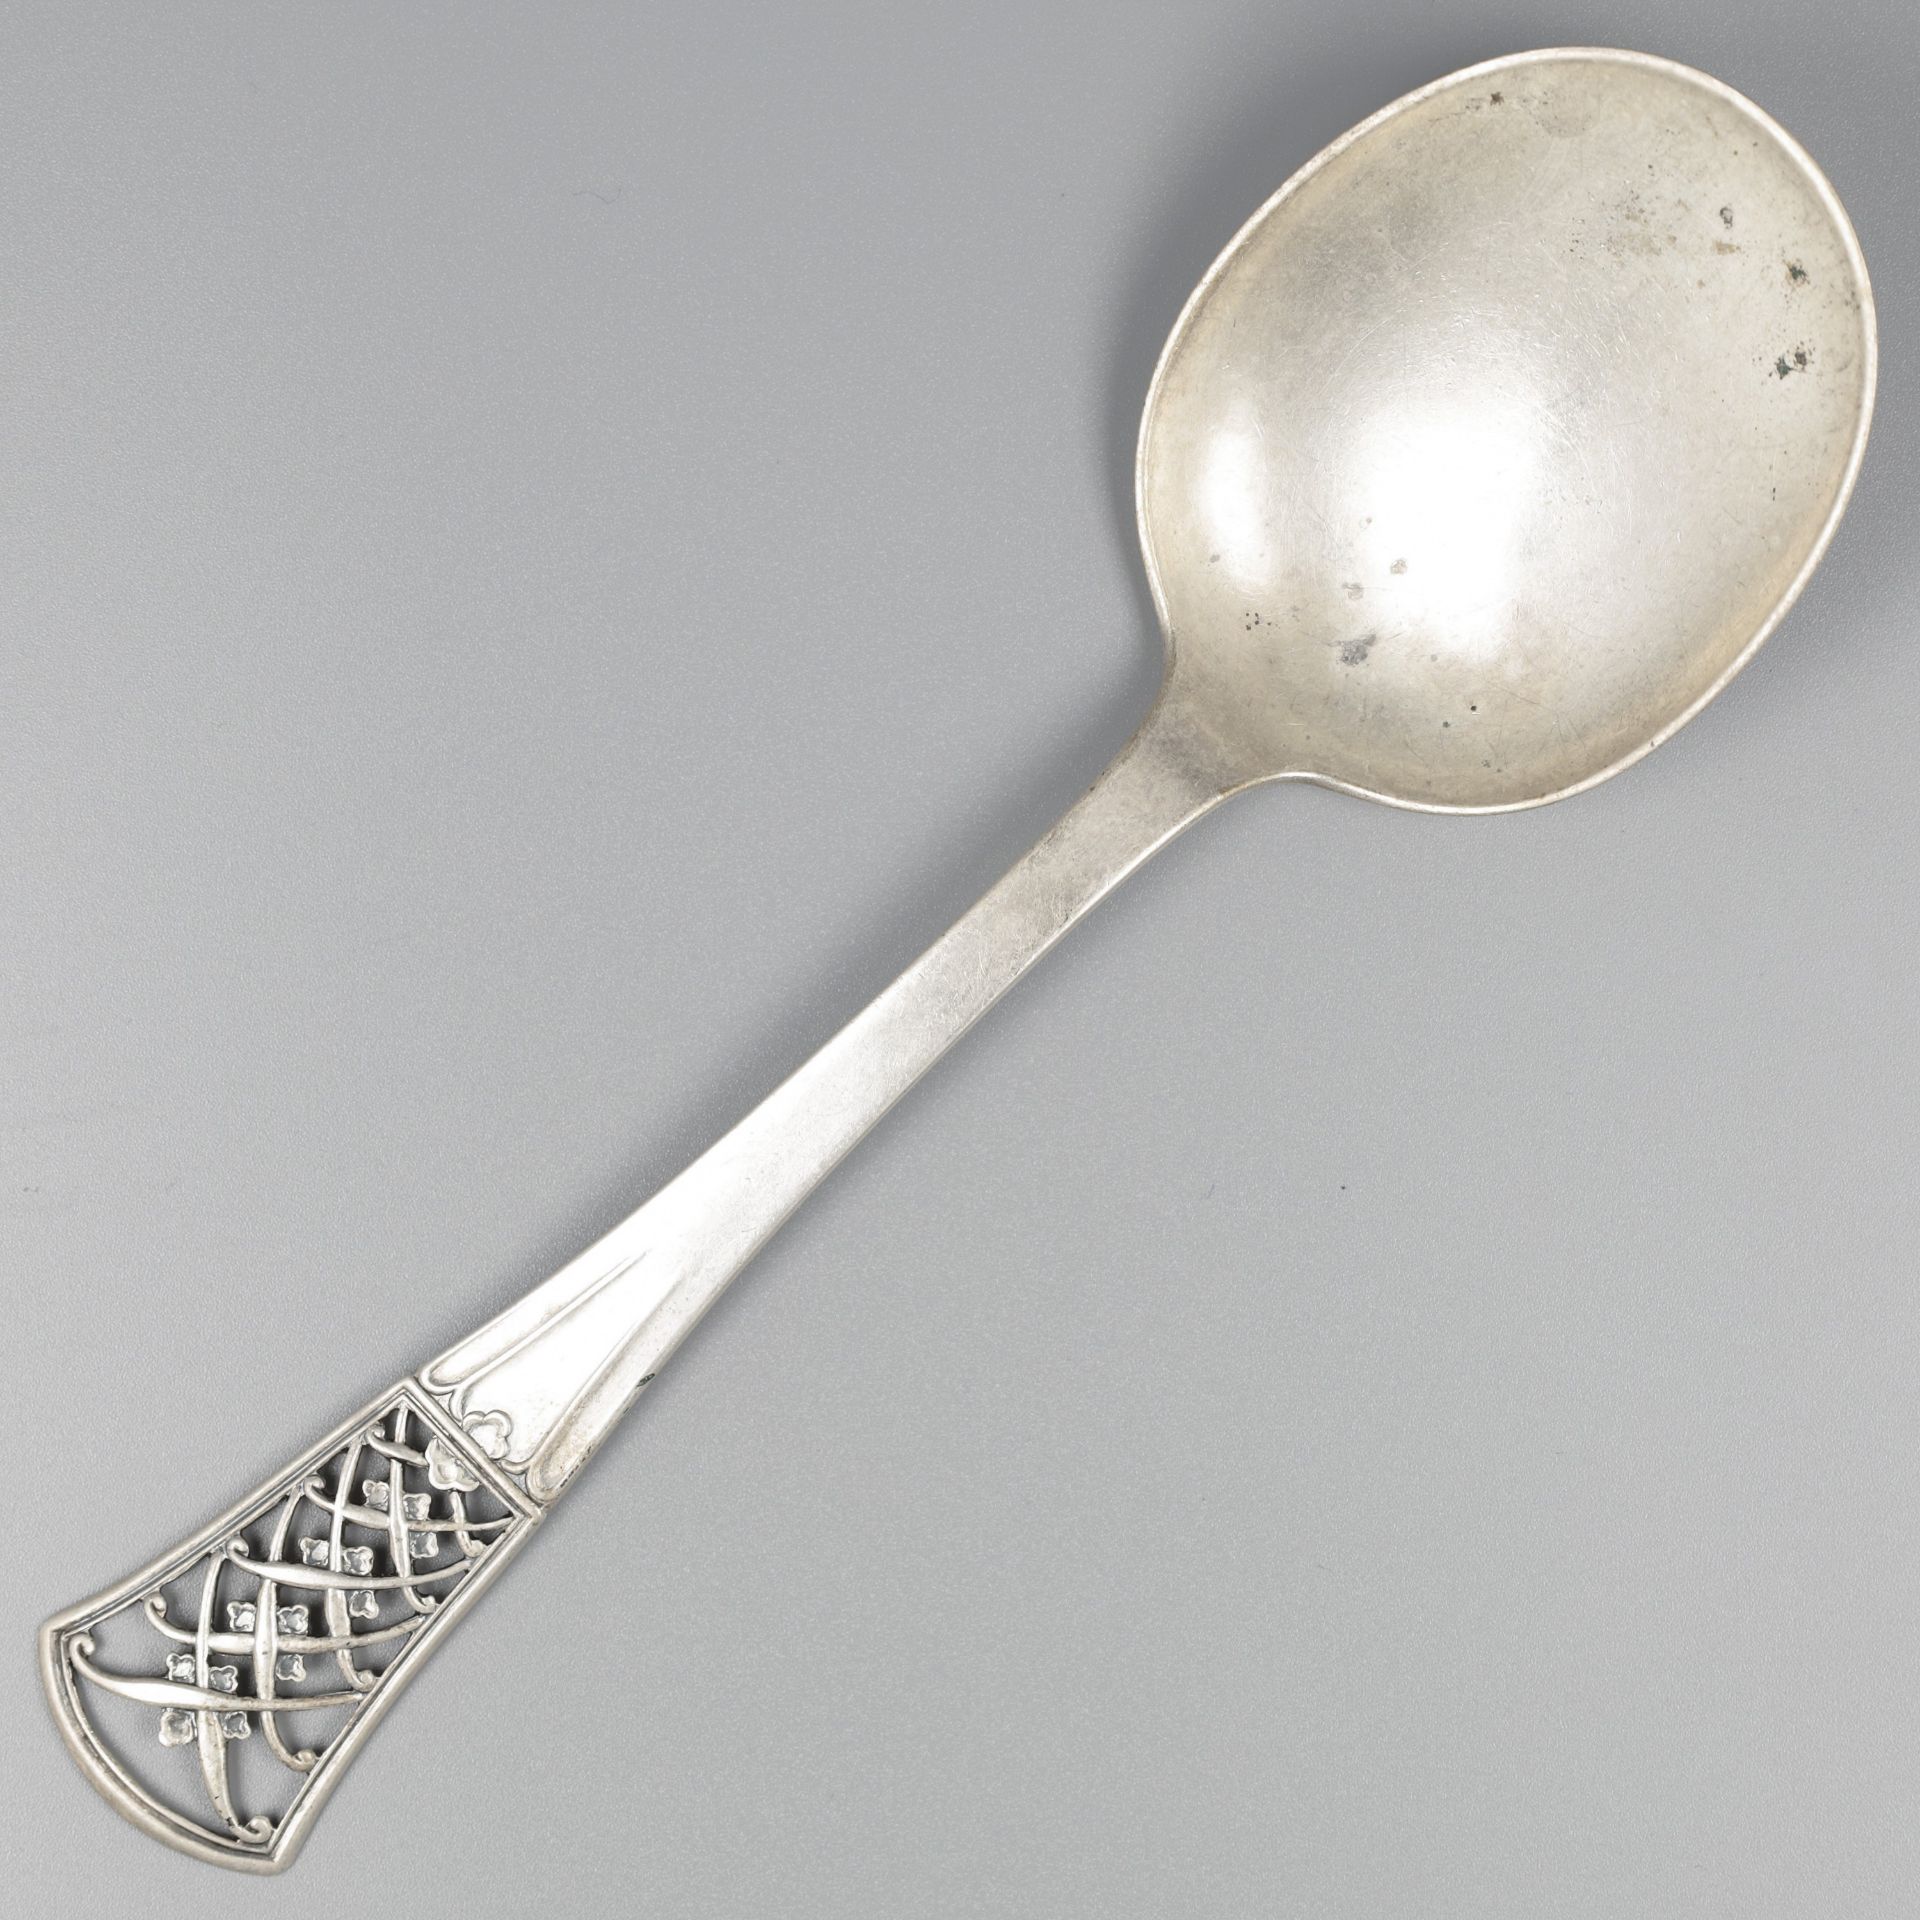 No reserve - Silver serving spoon.